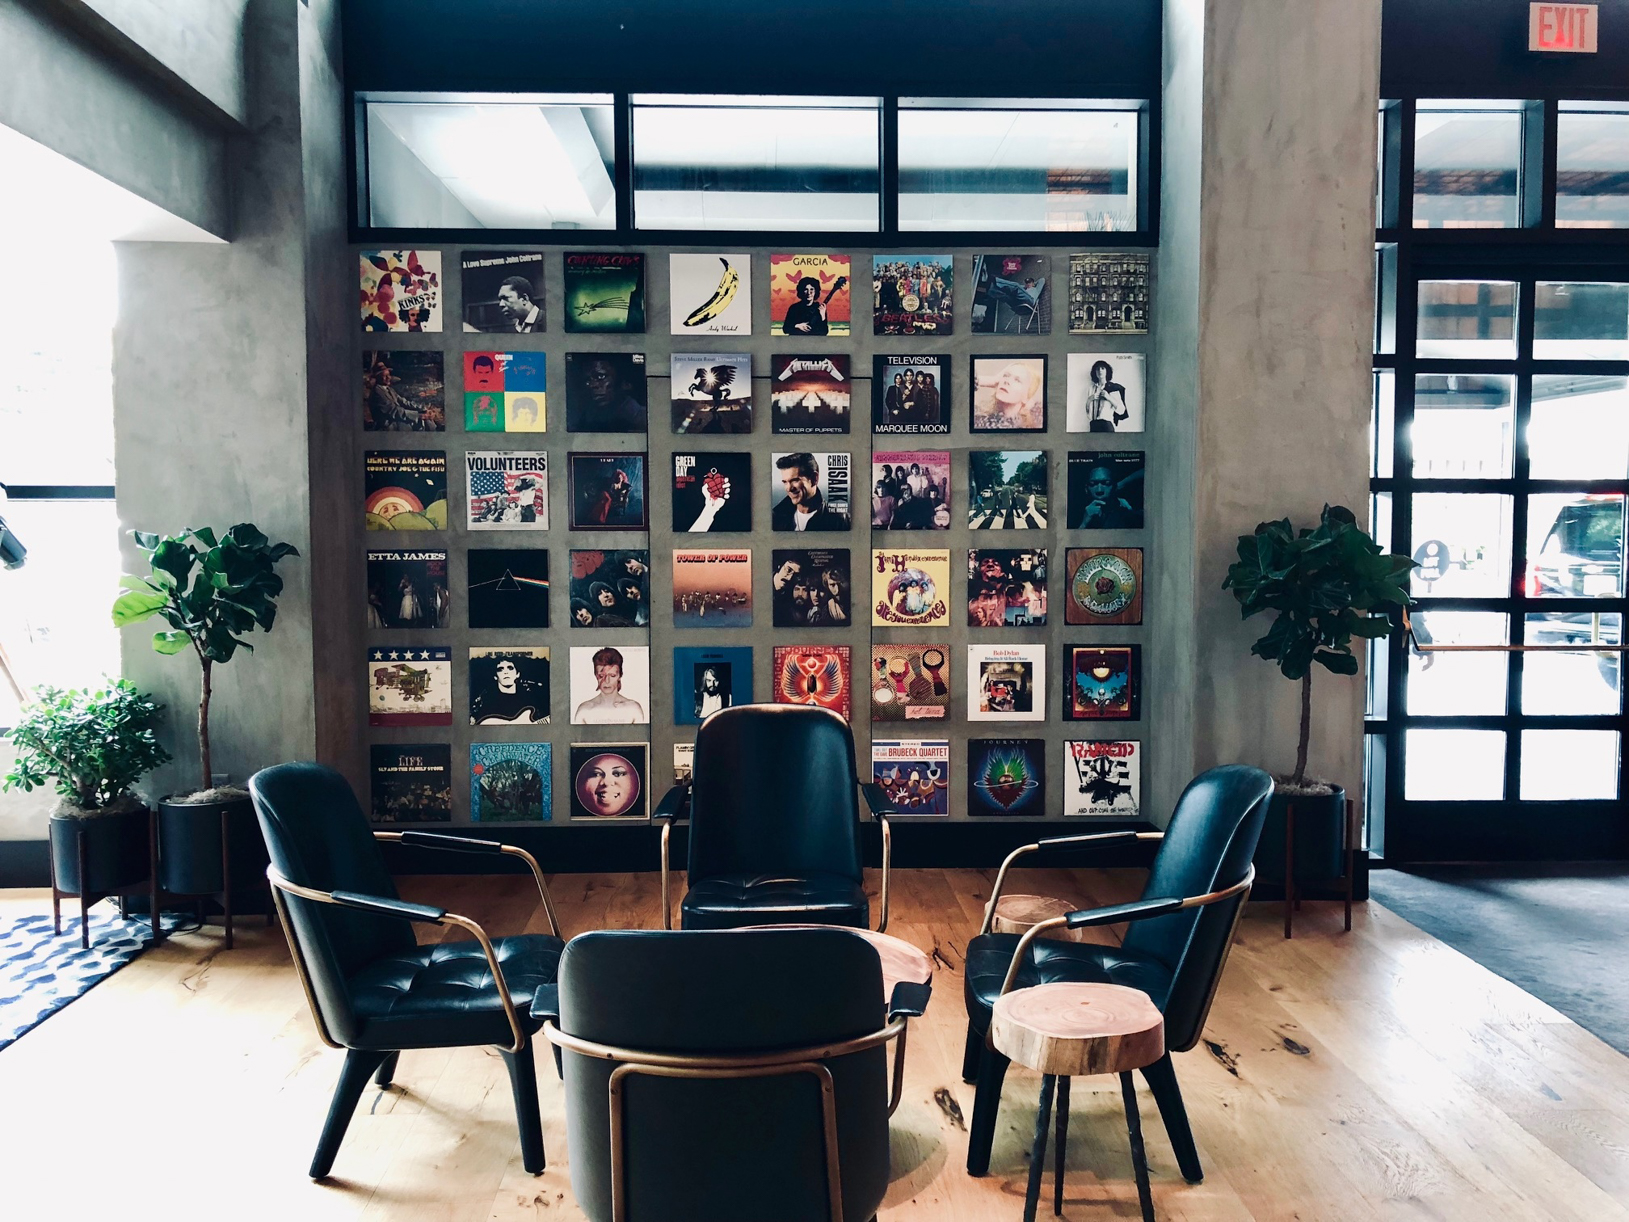 Hotel Kabuki A wall of record covers reverberates the vibe of the music-infused property.